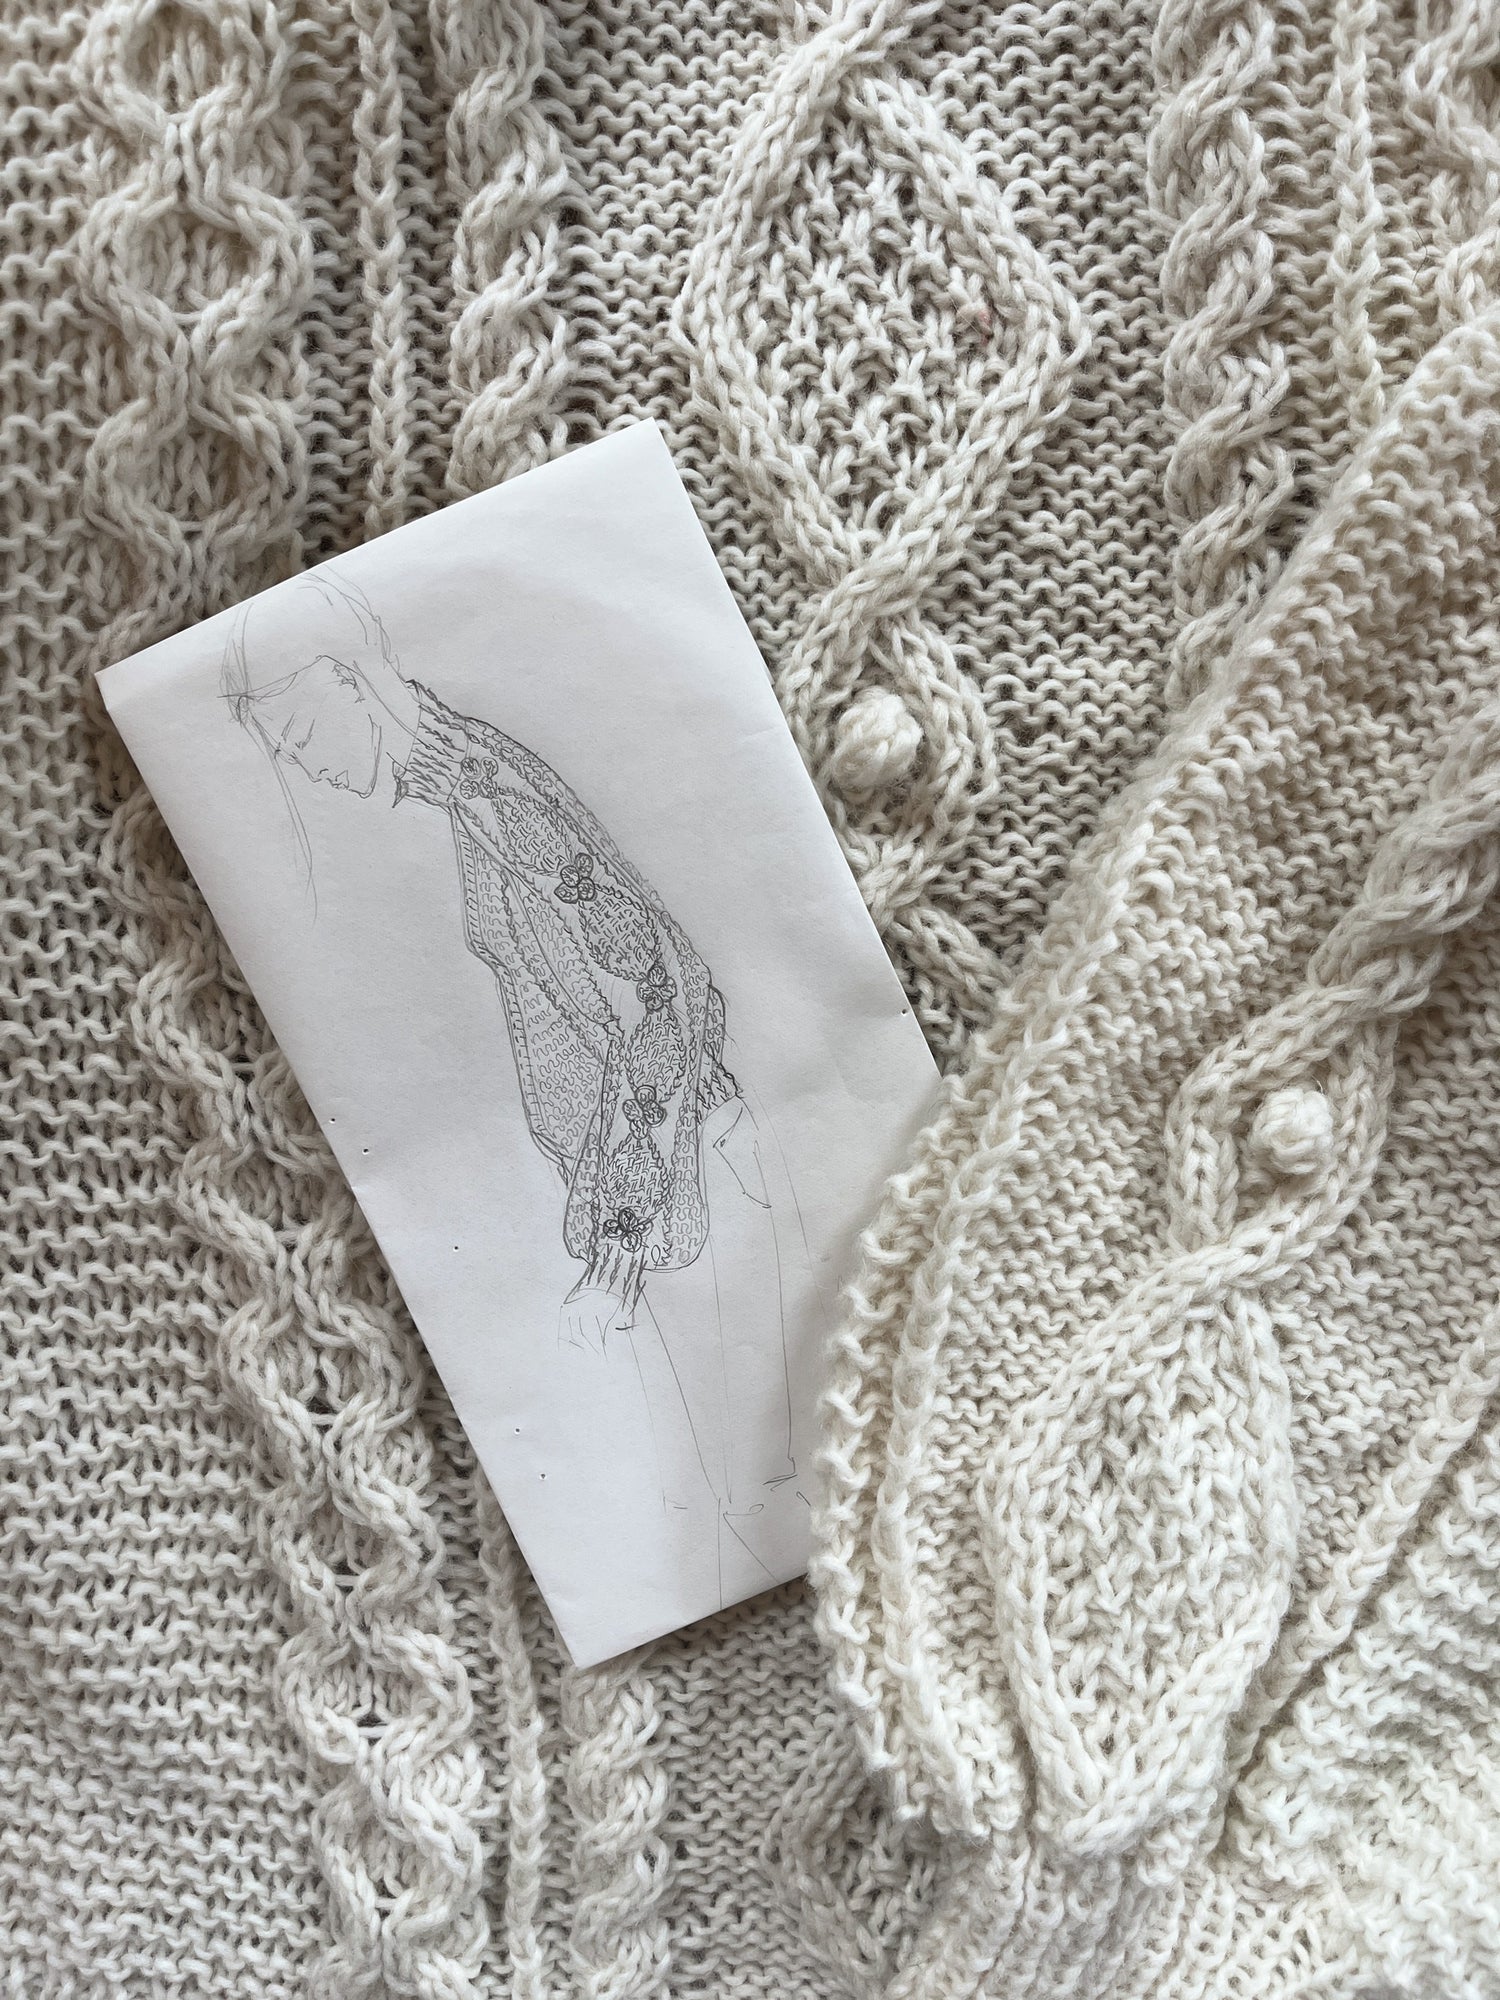 Naturally luxurious hand knit cream cable sweater and detailed designer sketch by BAWN 